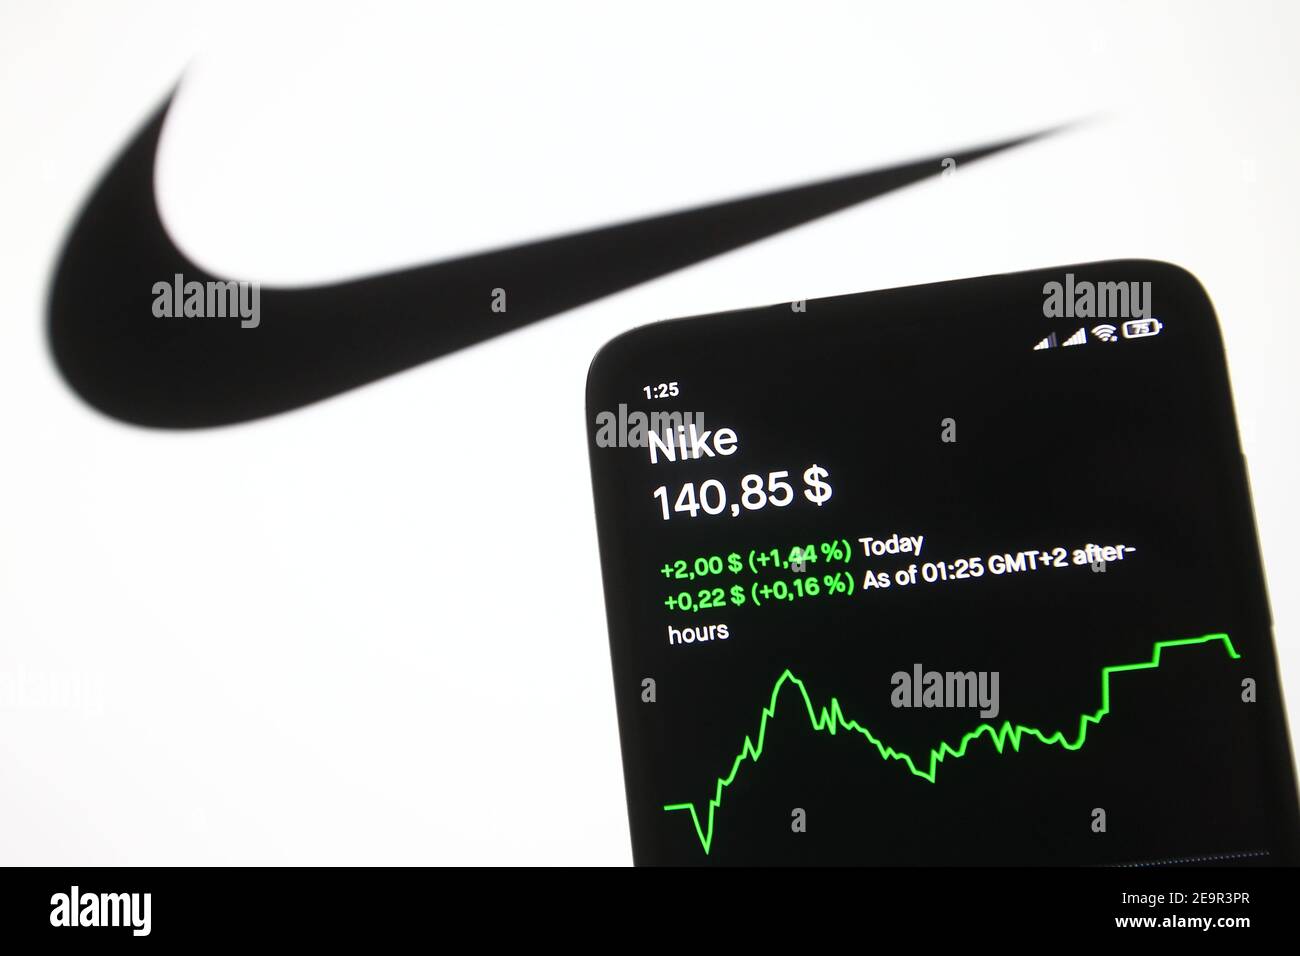 nike after hours stock price,Quality assurance,protein-burger.com